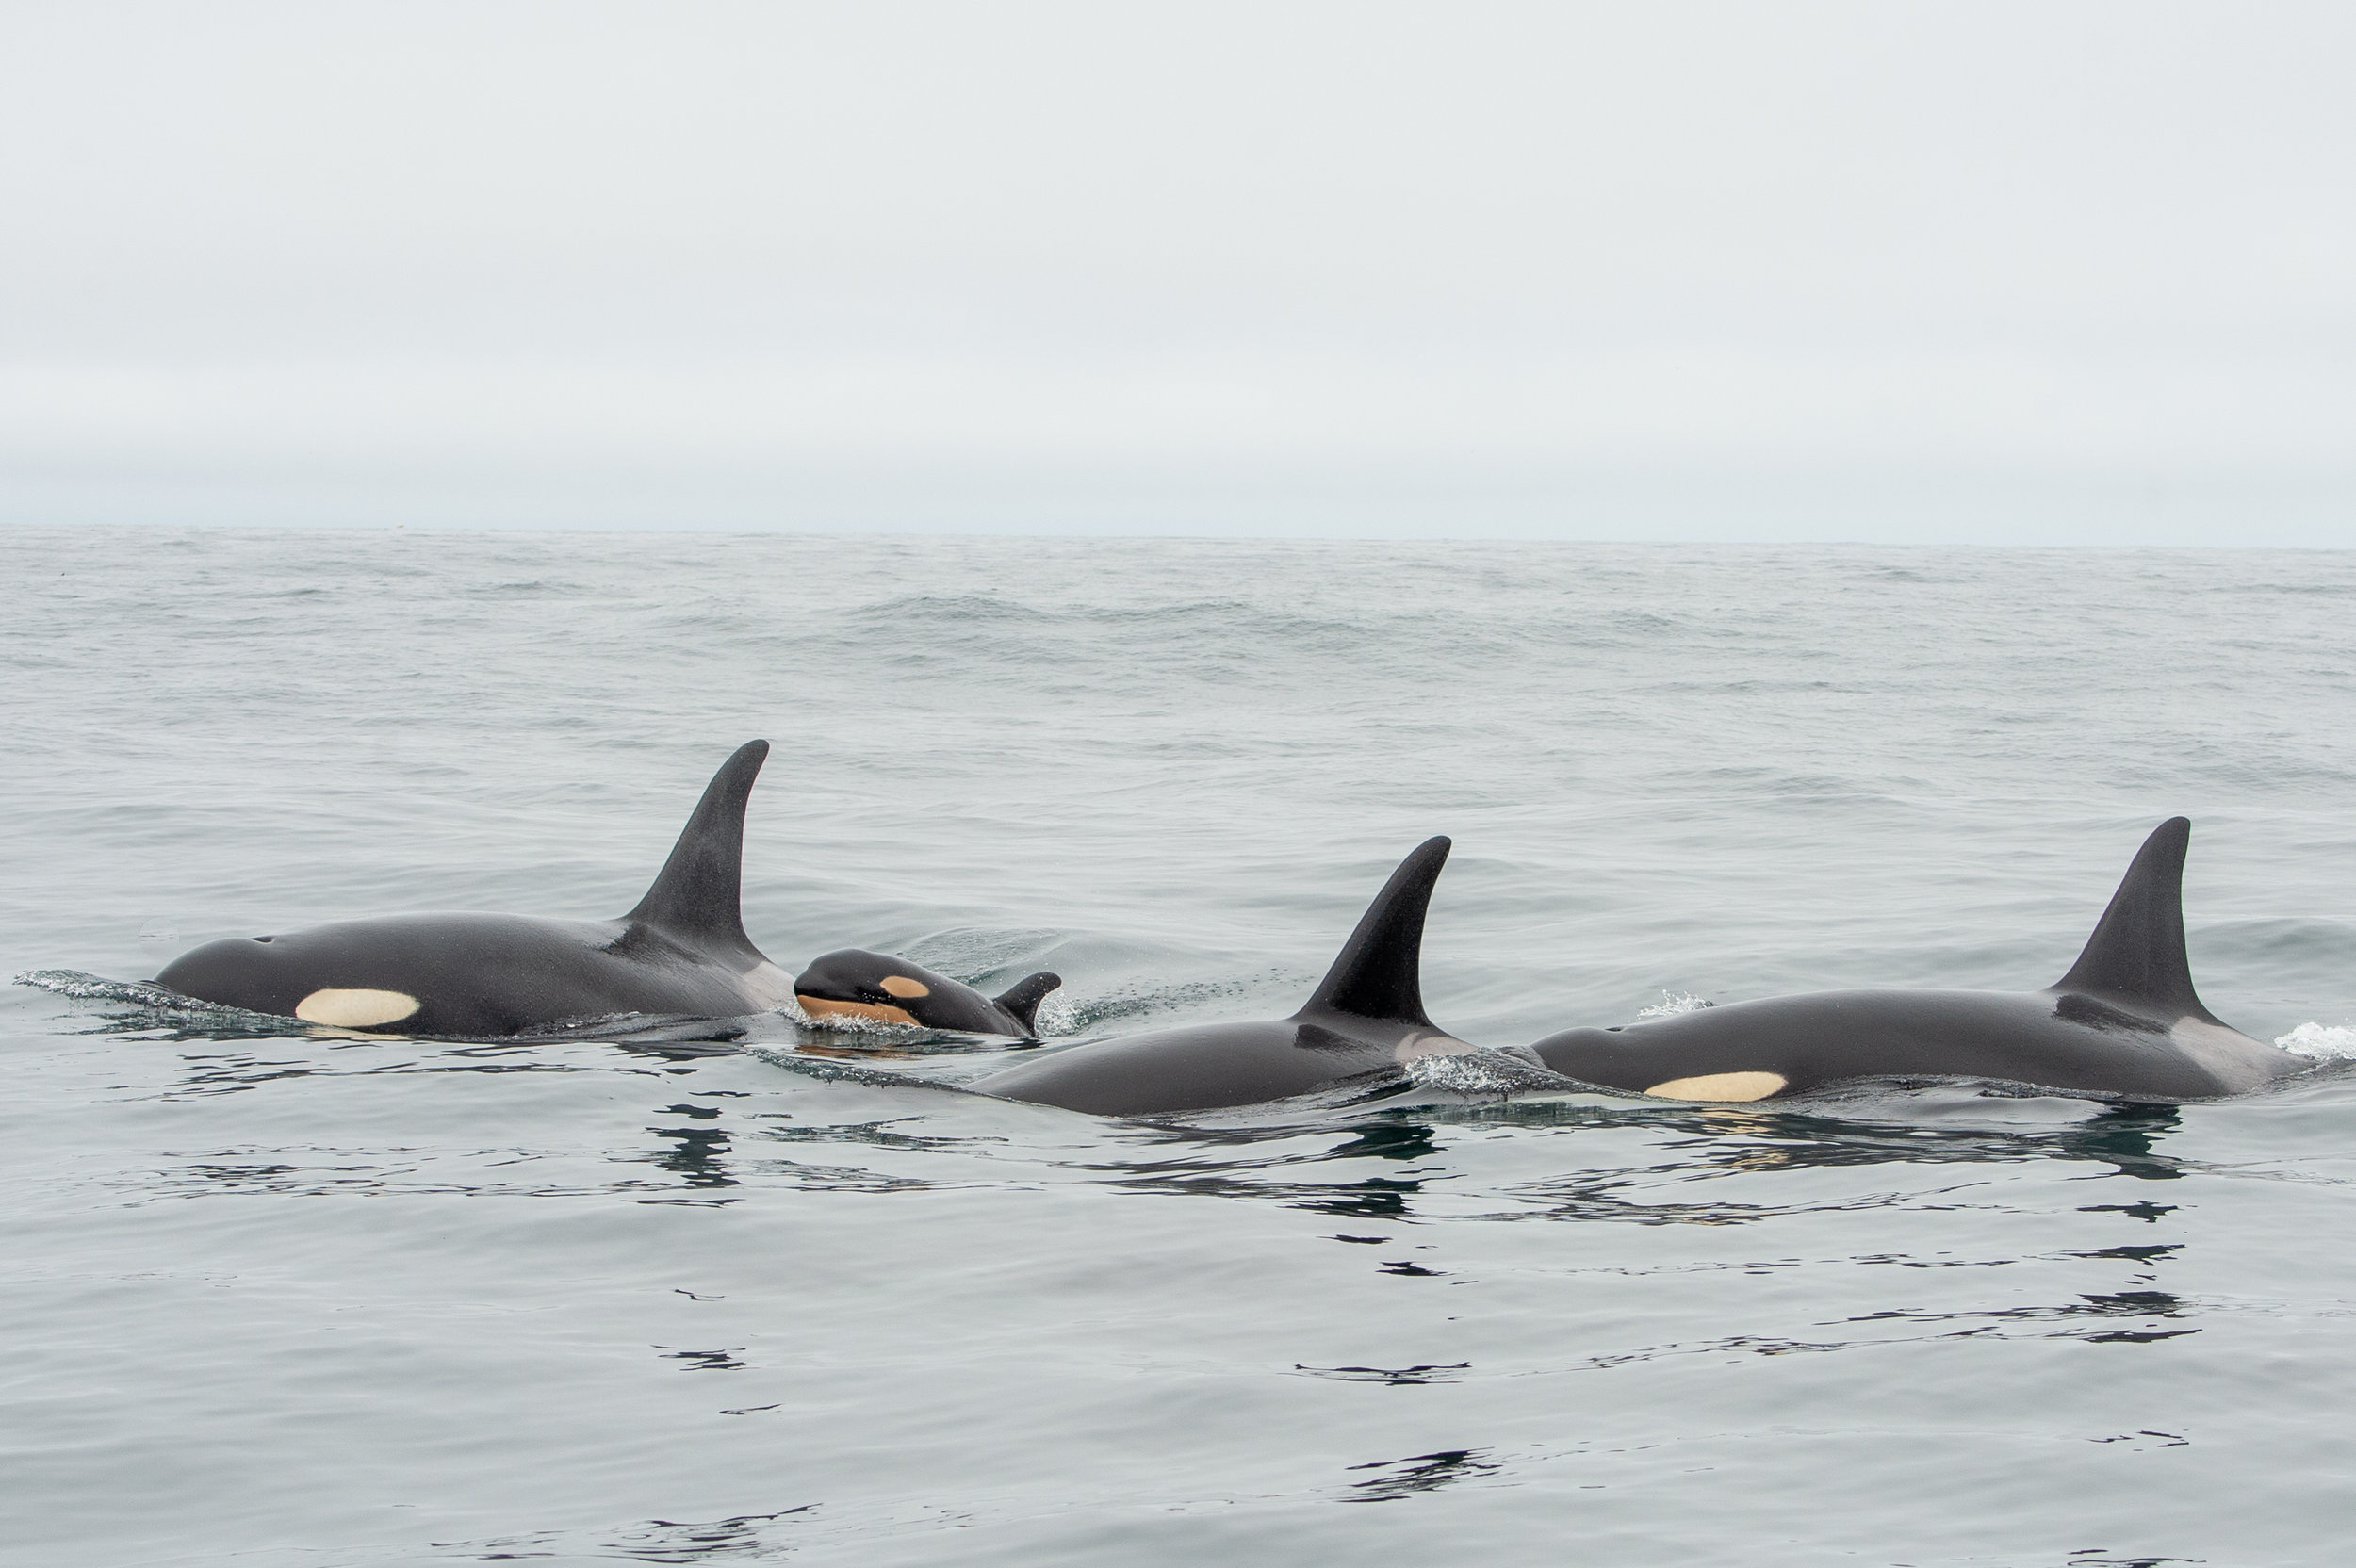 Newborn Southern Resident Killer Whale calf spotted off the coast of